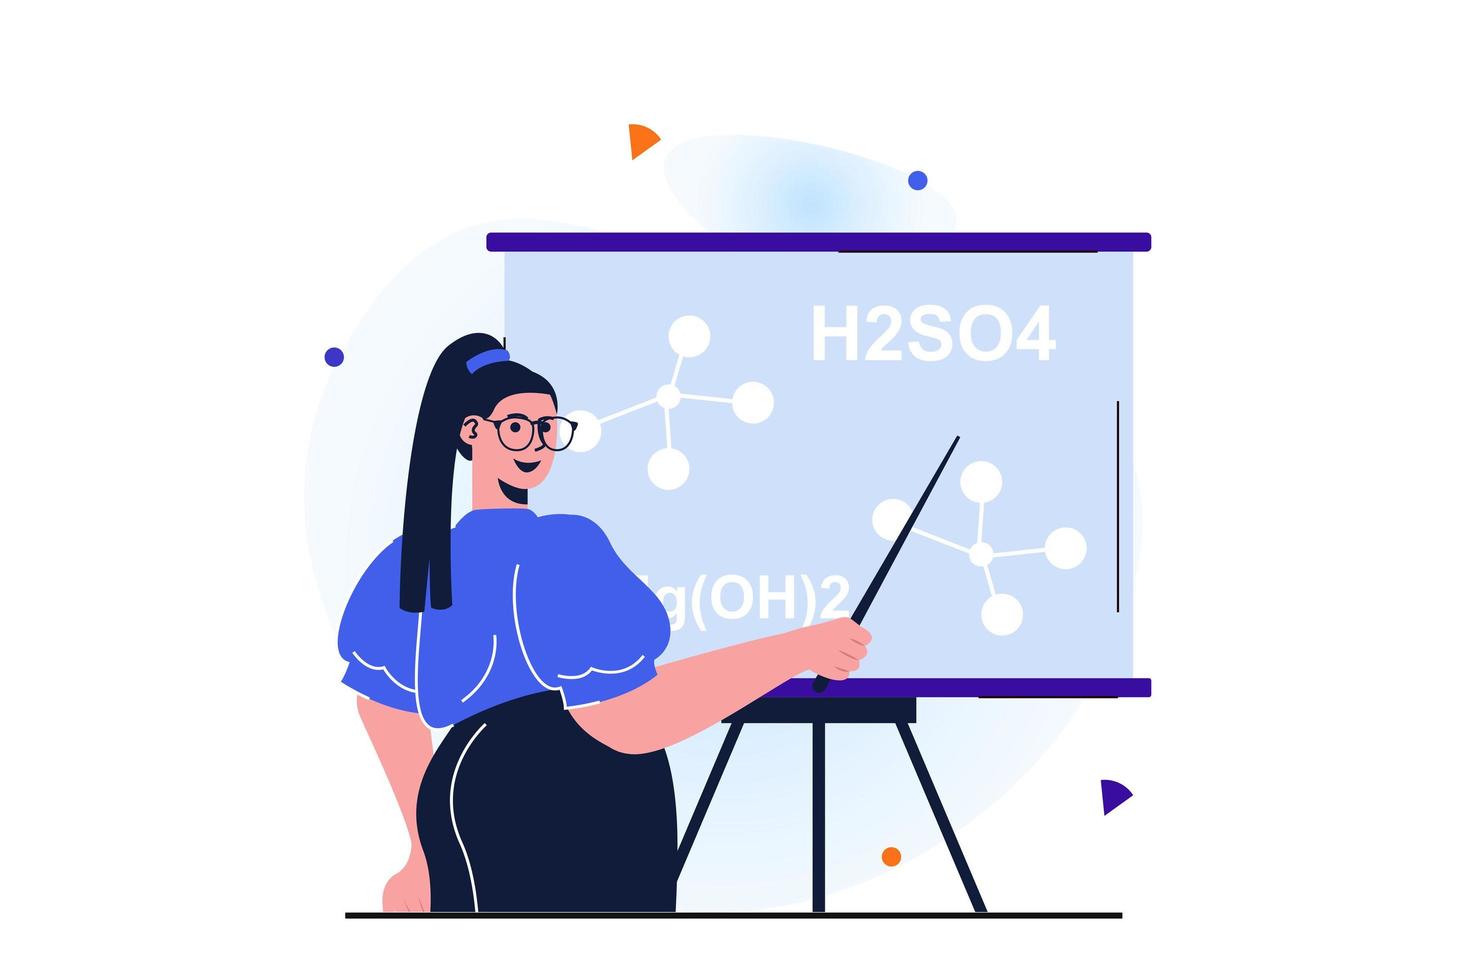 Women working modern flat concept for web banner design. Woman is chemistry teacher, stands with pointer near blackboard and teaching in classroom. Vector illustration with isolated people scene